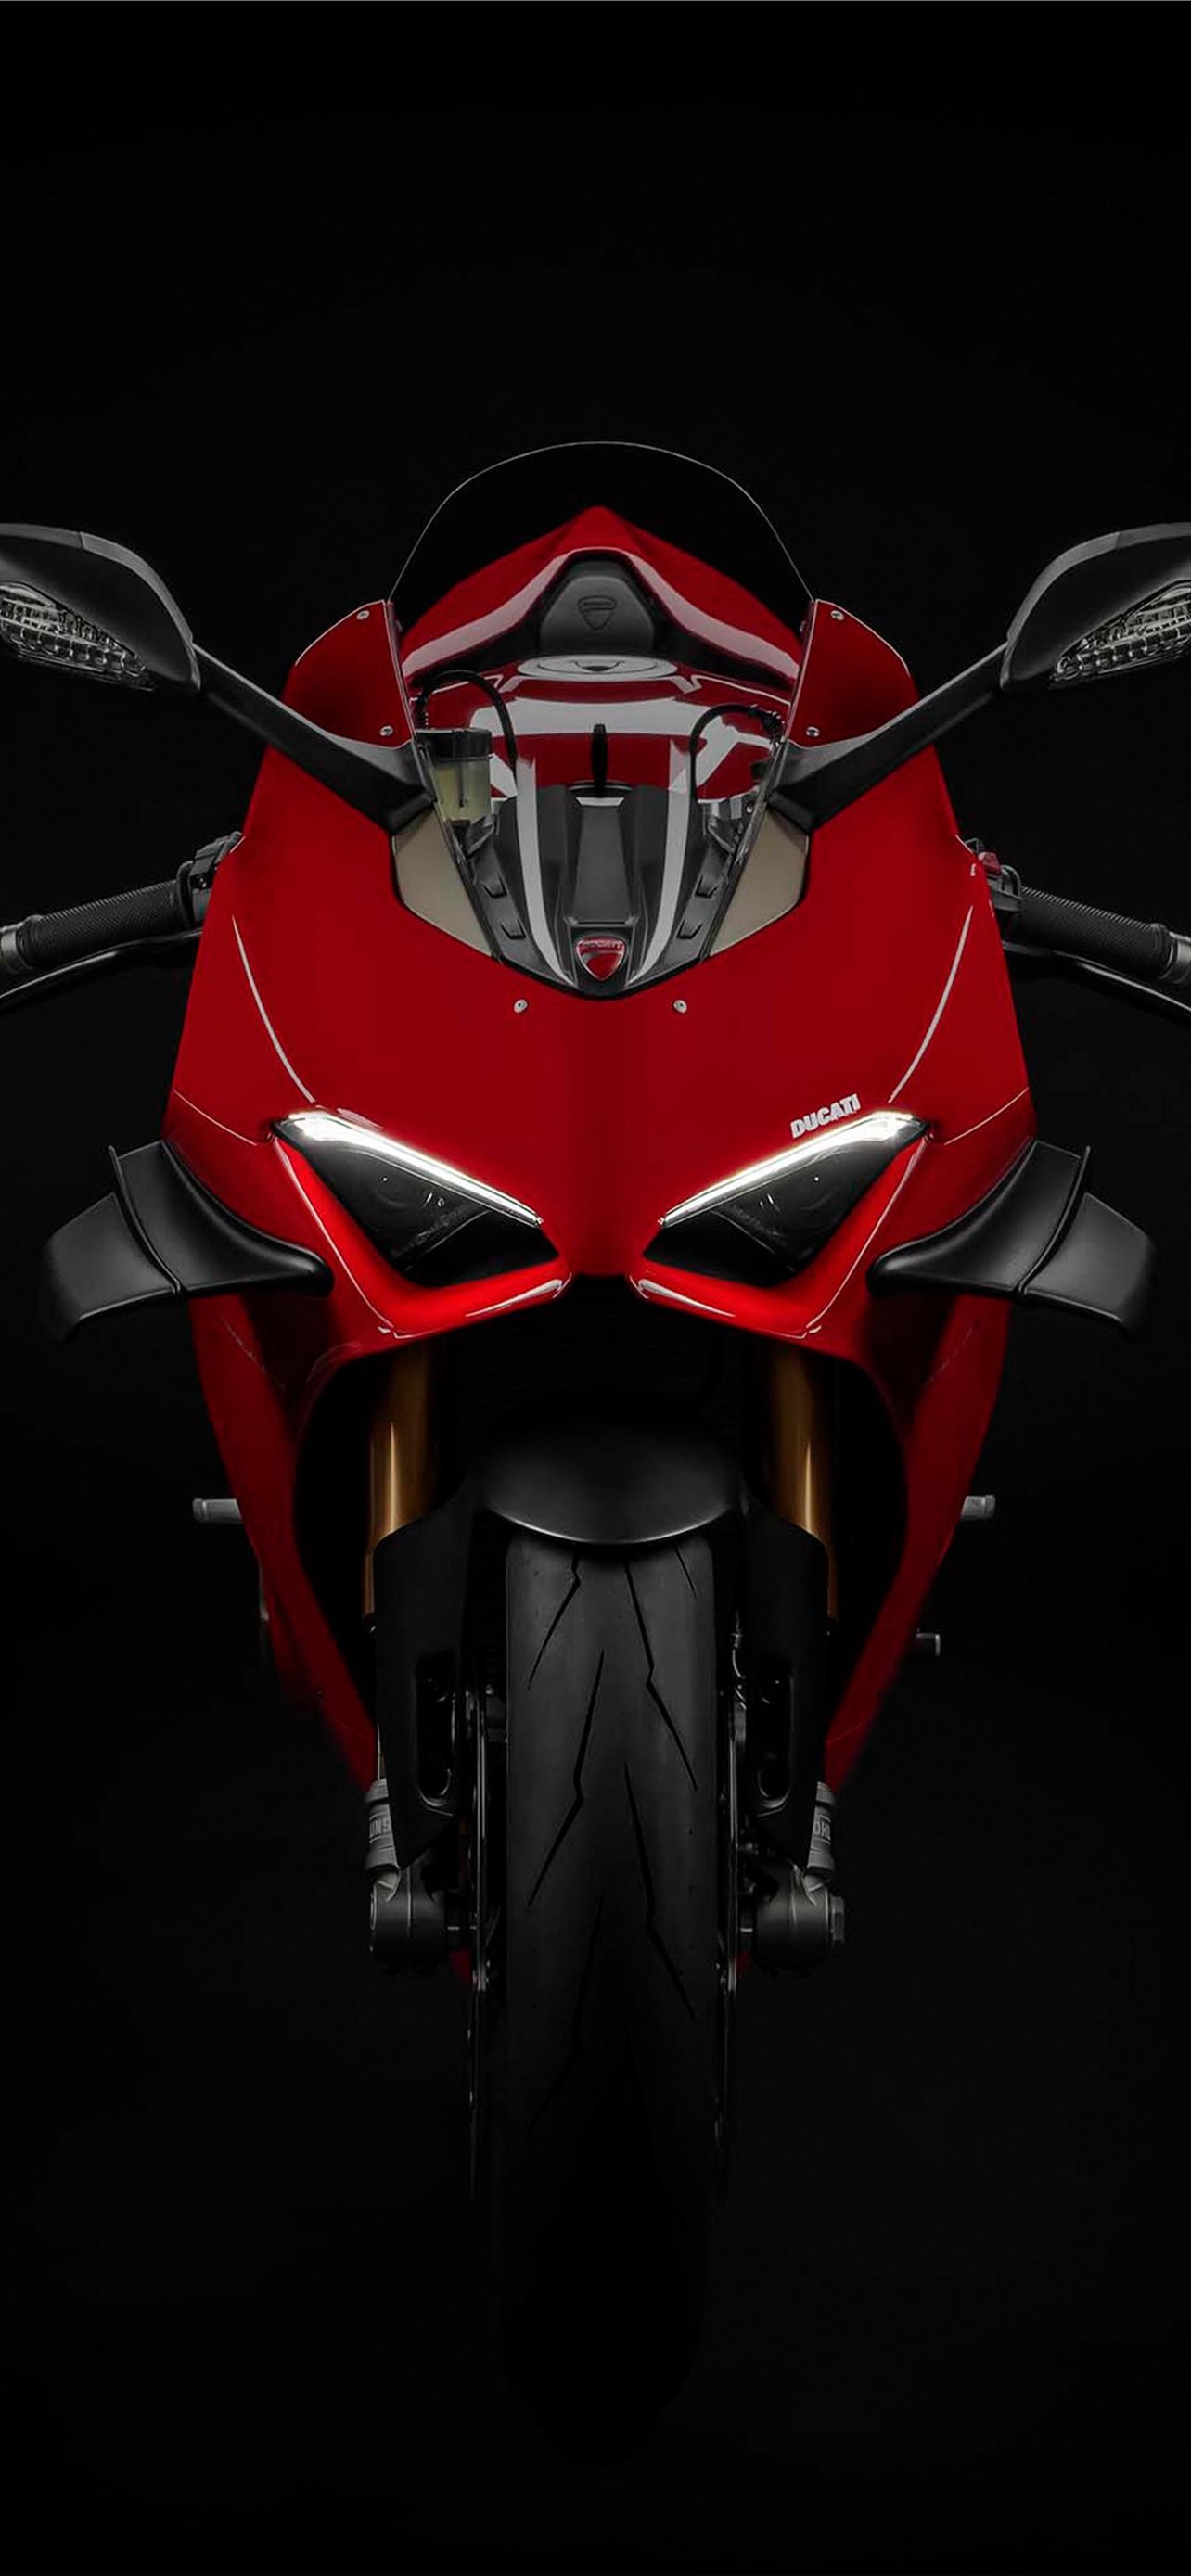 1500 Ducati Pictures  Download Free Images on Unsplash